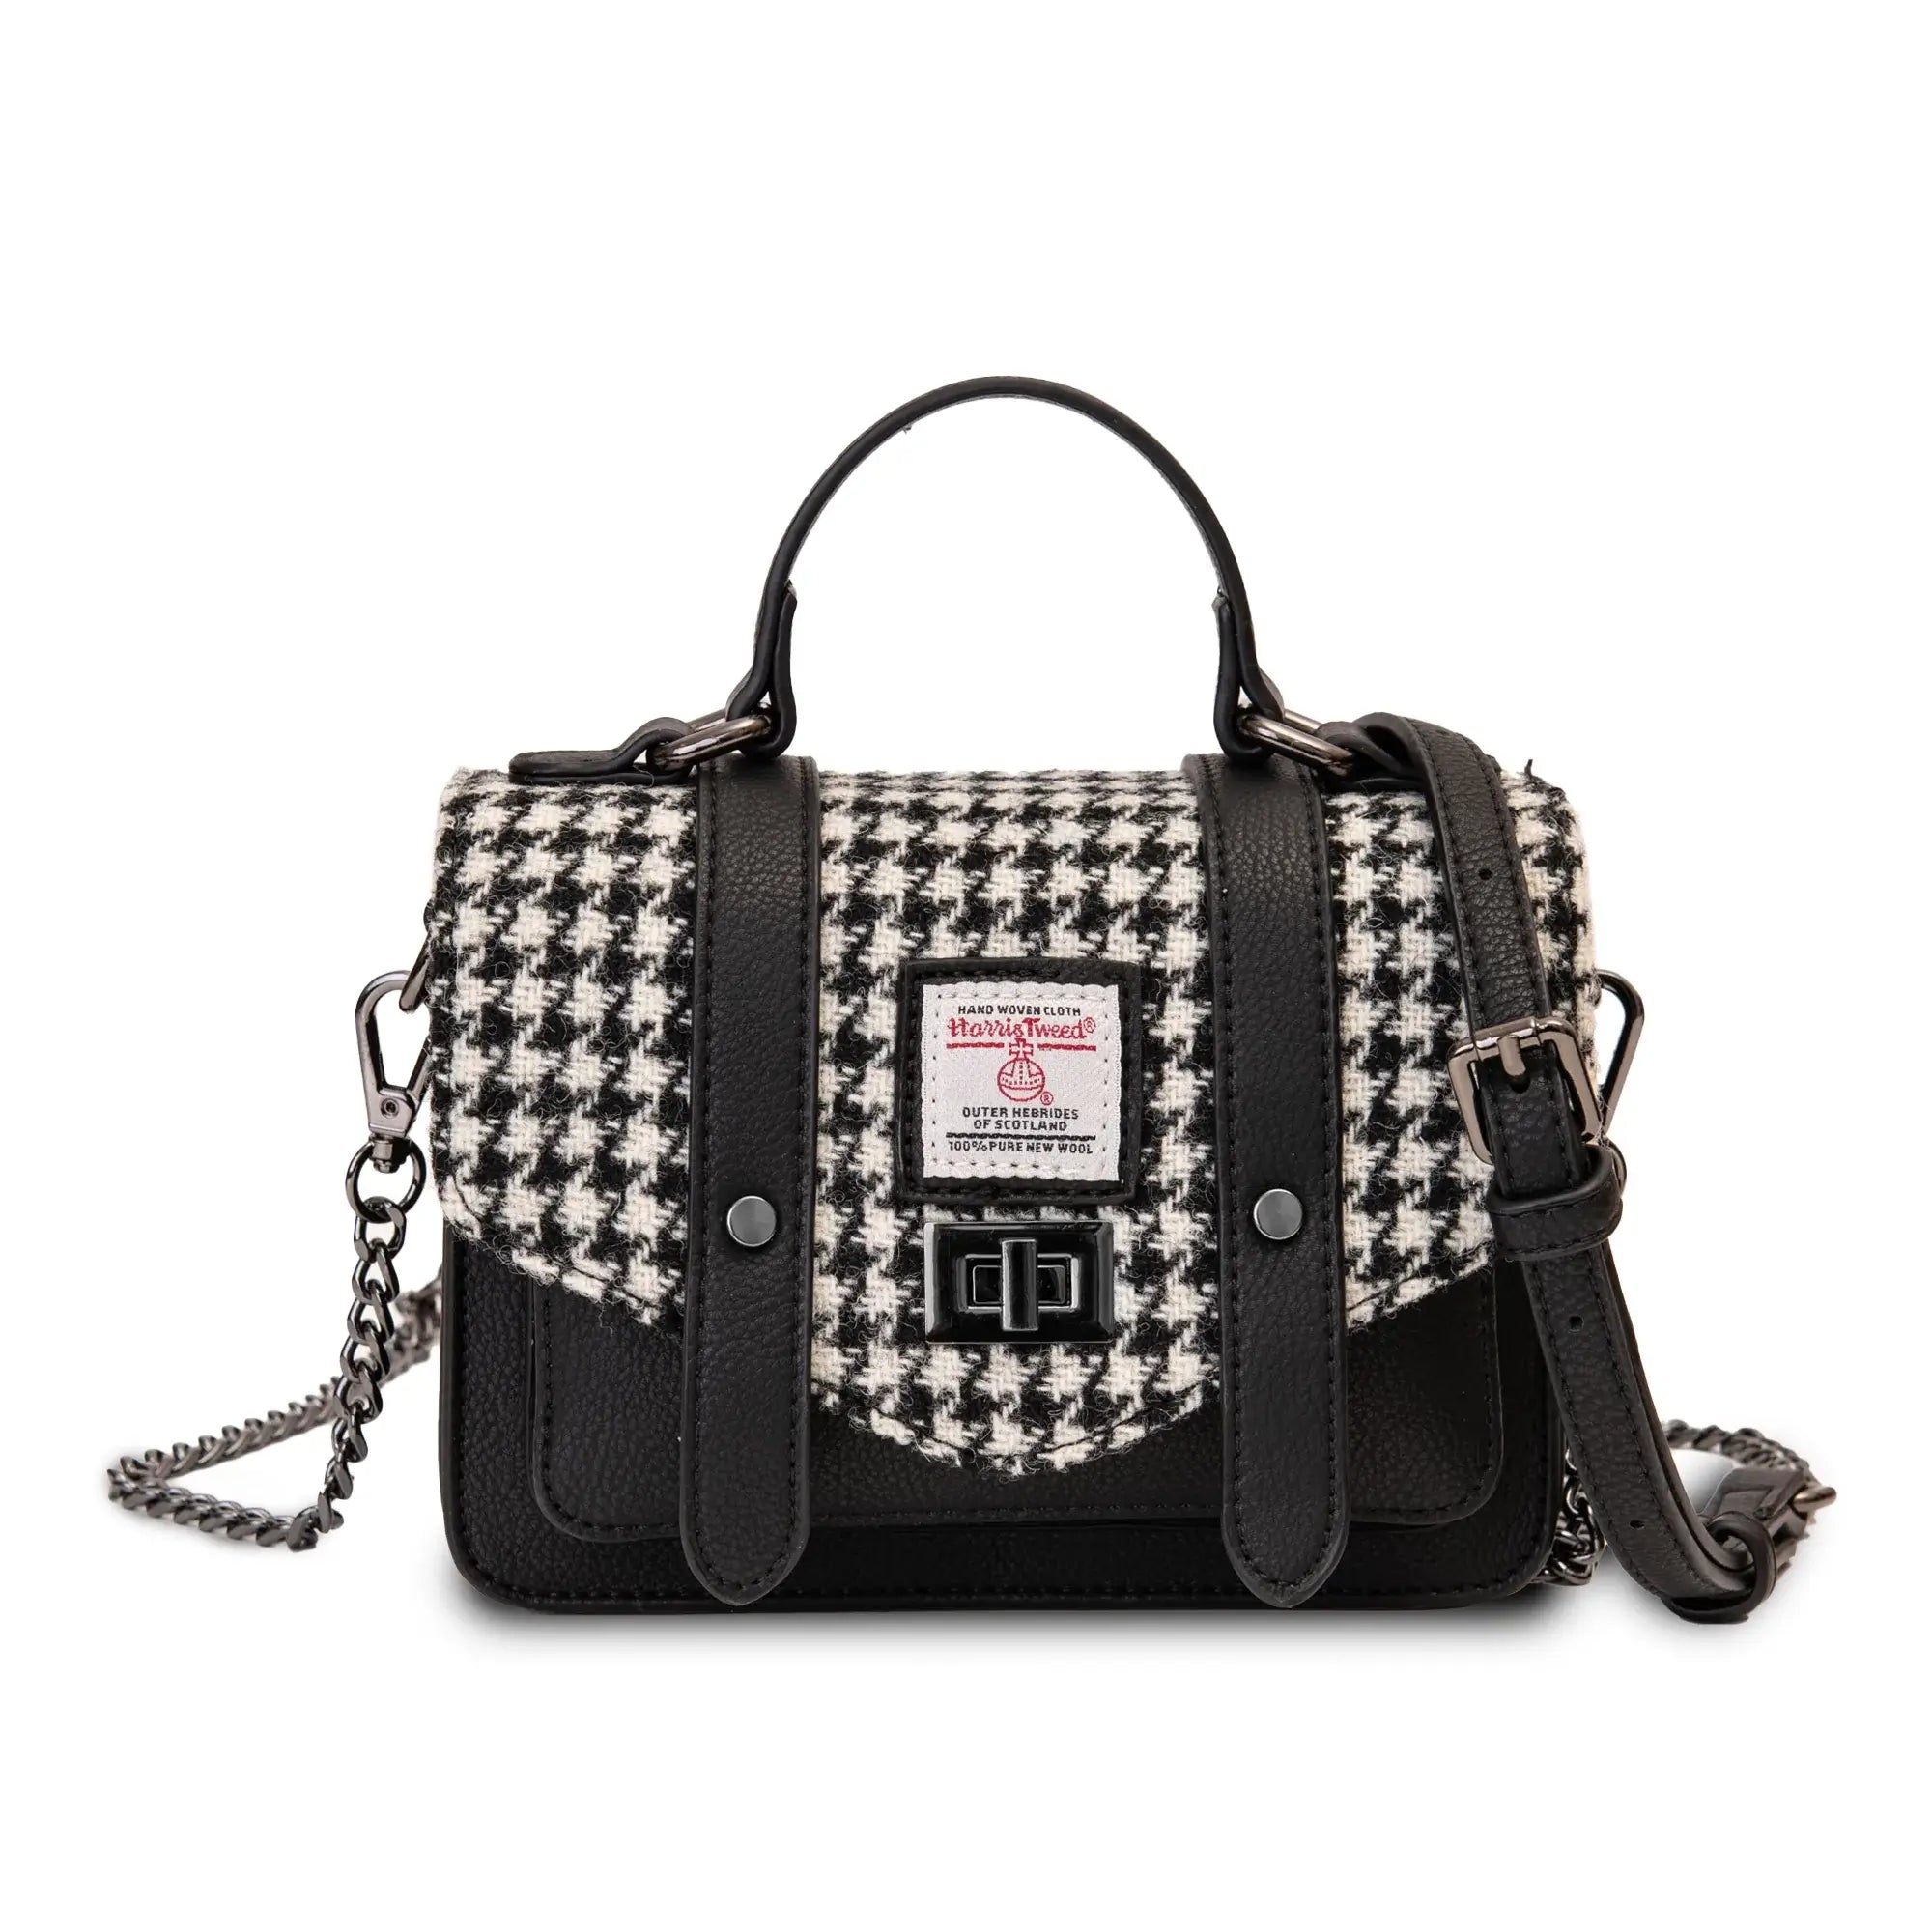 Image of Black & White Dogtooth Micro Satchel with Harris Tweed®